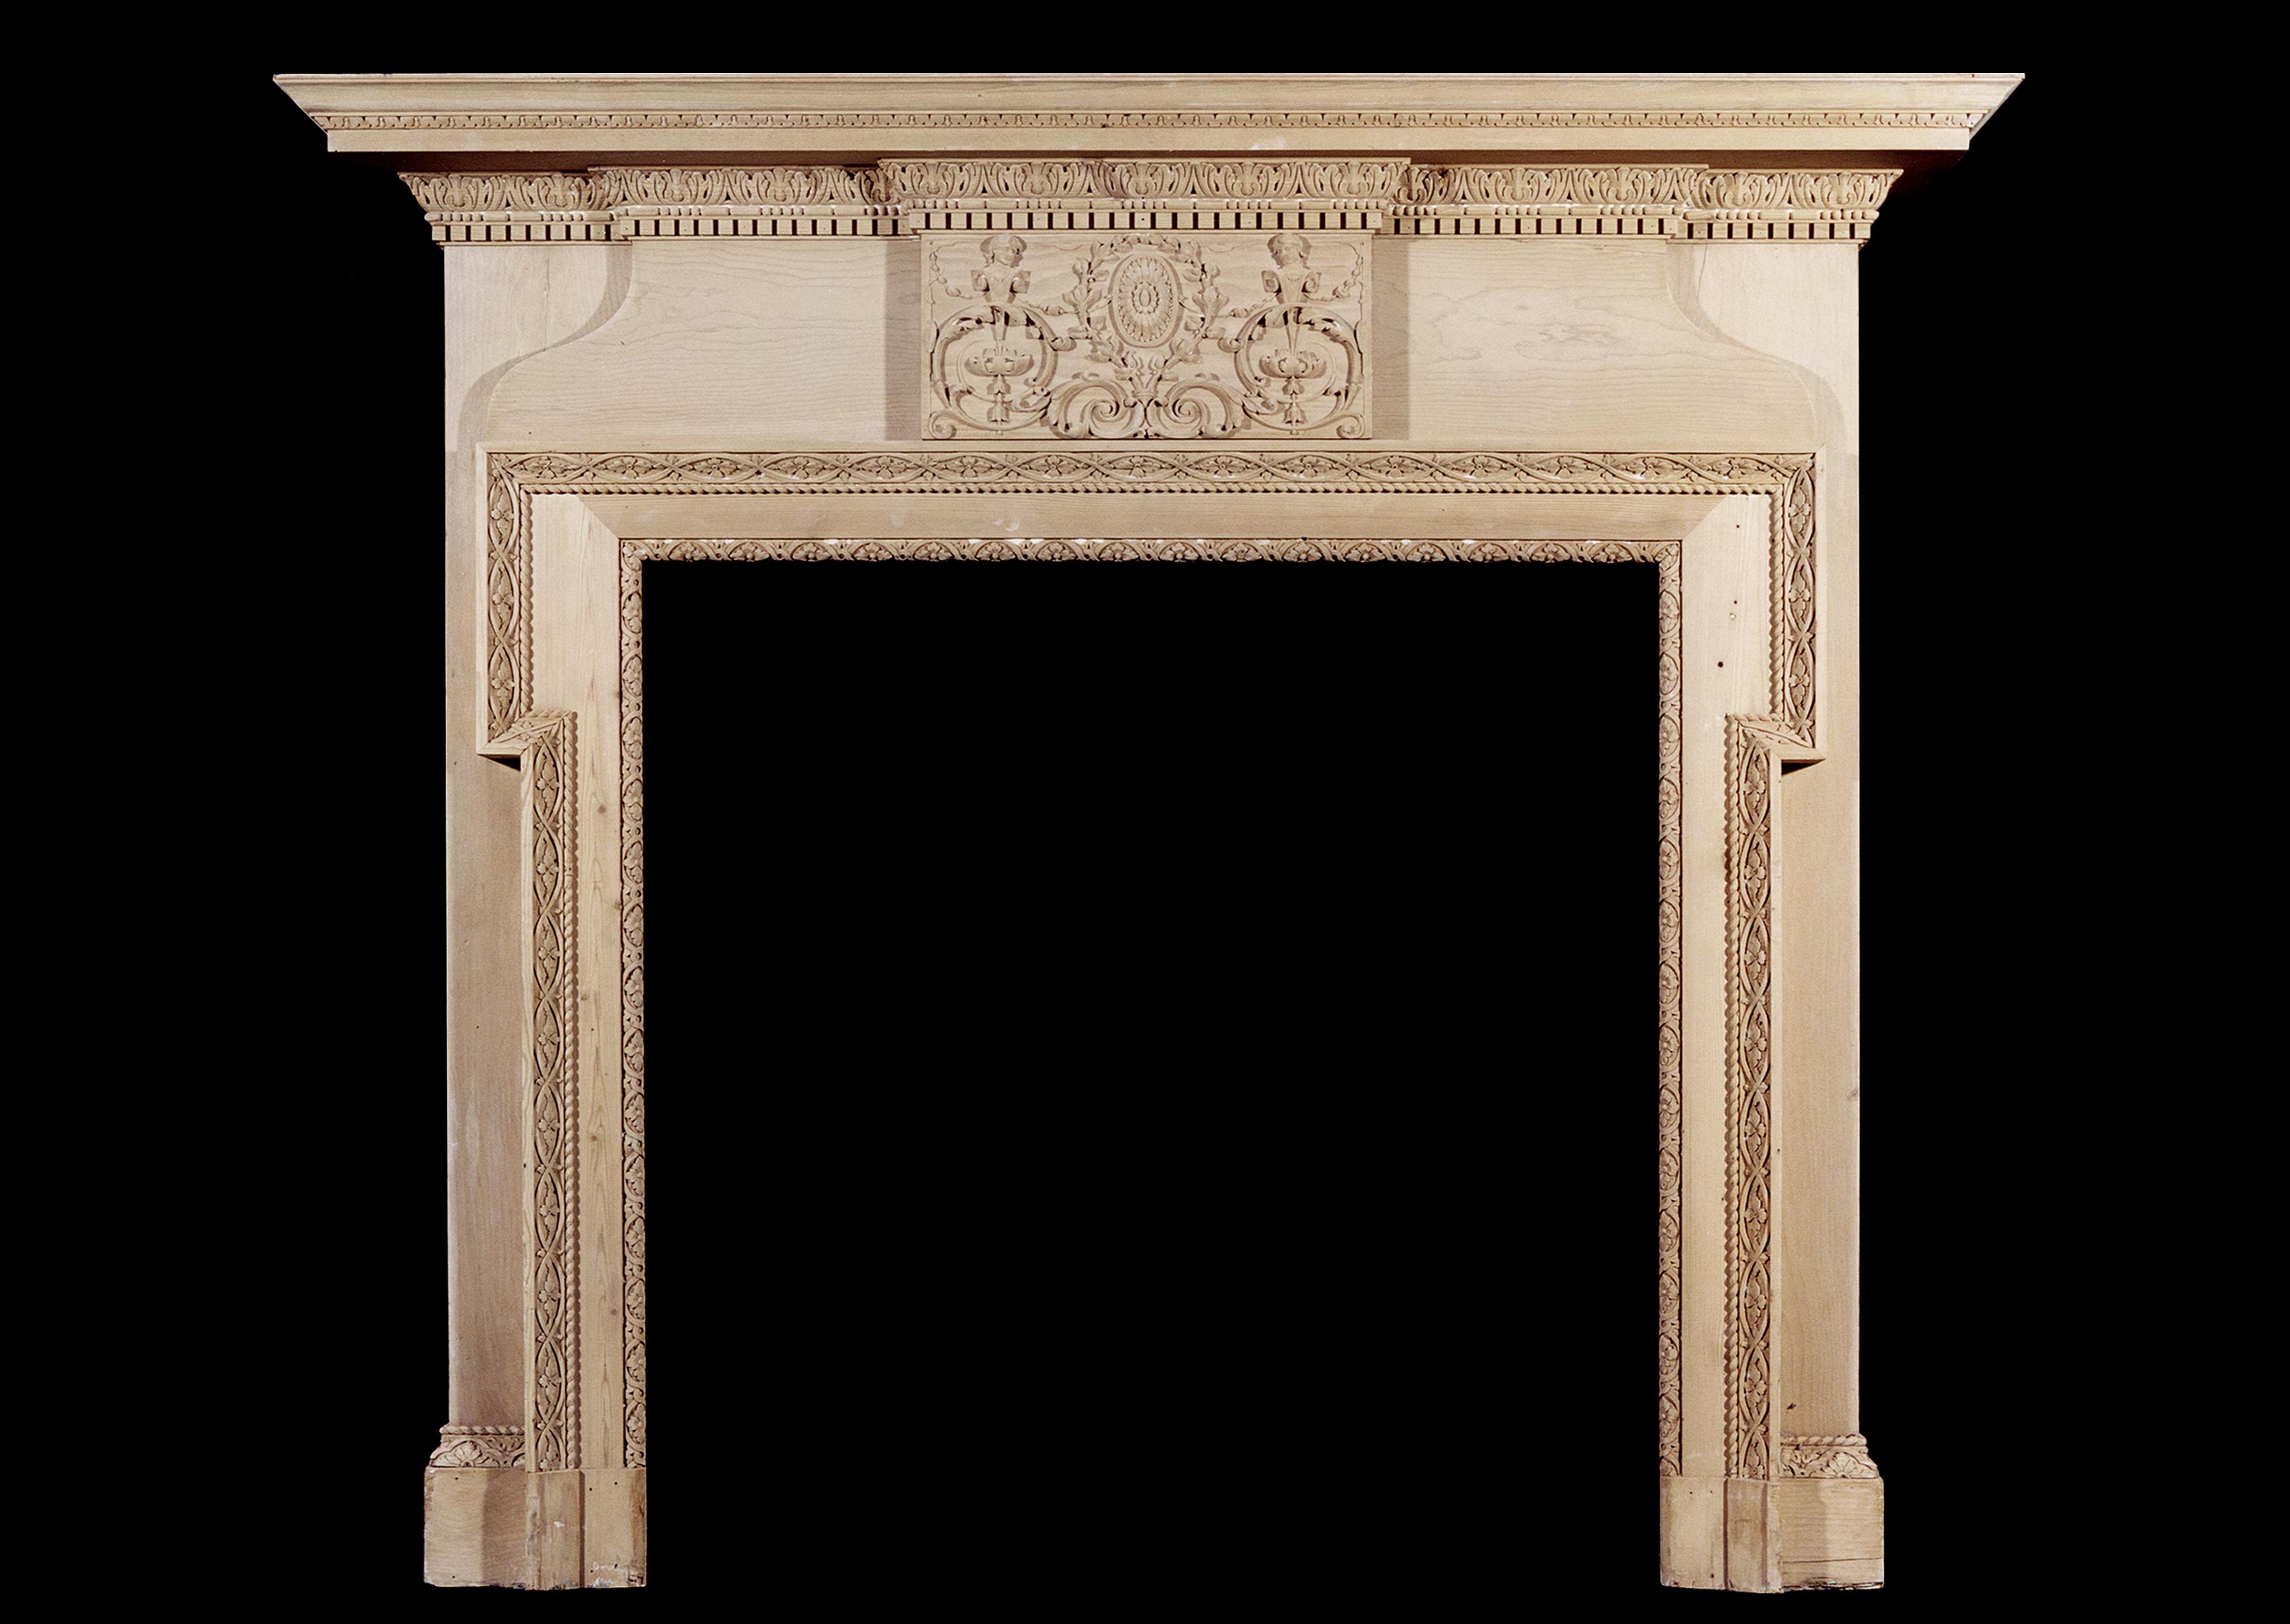 A mid-19th century English carved pine fireplace, with carved leaf and dentils to cornice, carved patera and foliage to centre frieze and leaf and rope twist around inner mouldings.

Shelf Width:	1725 mm      	67 7/8 in
Overall Height:	1520 mm     